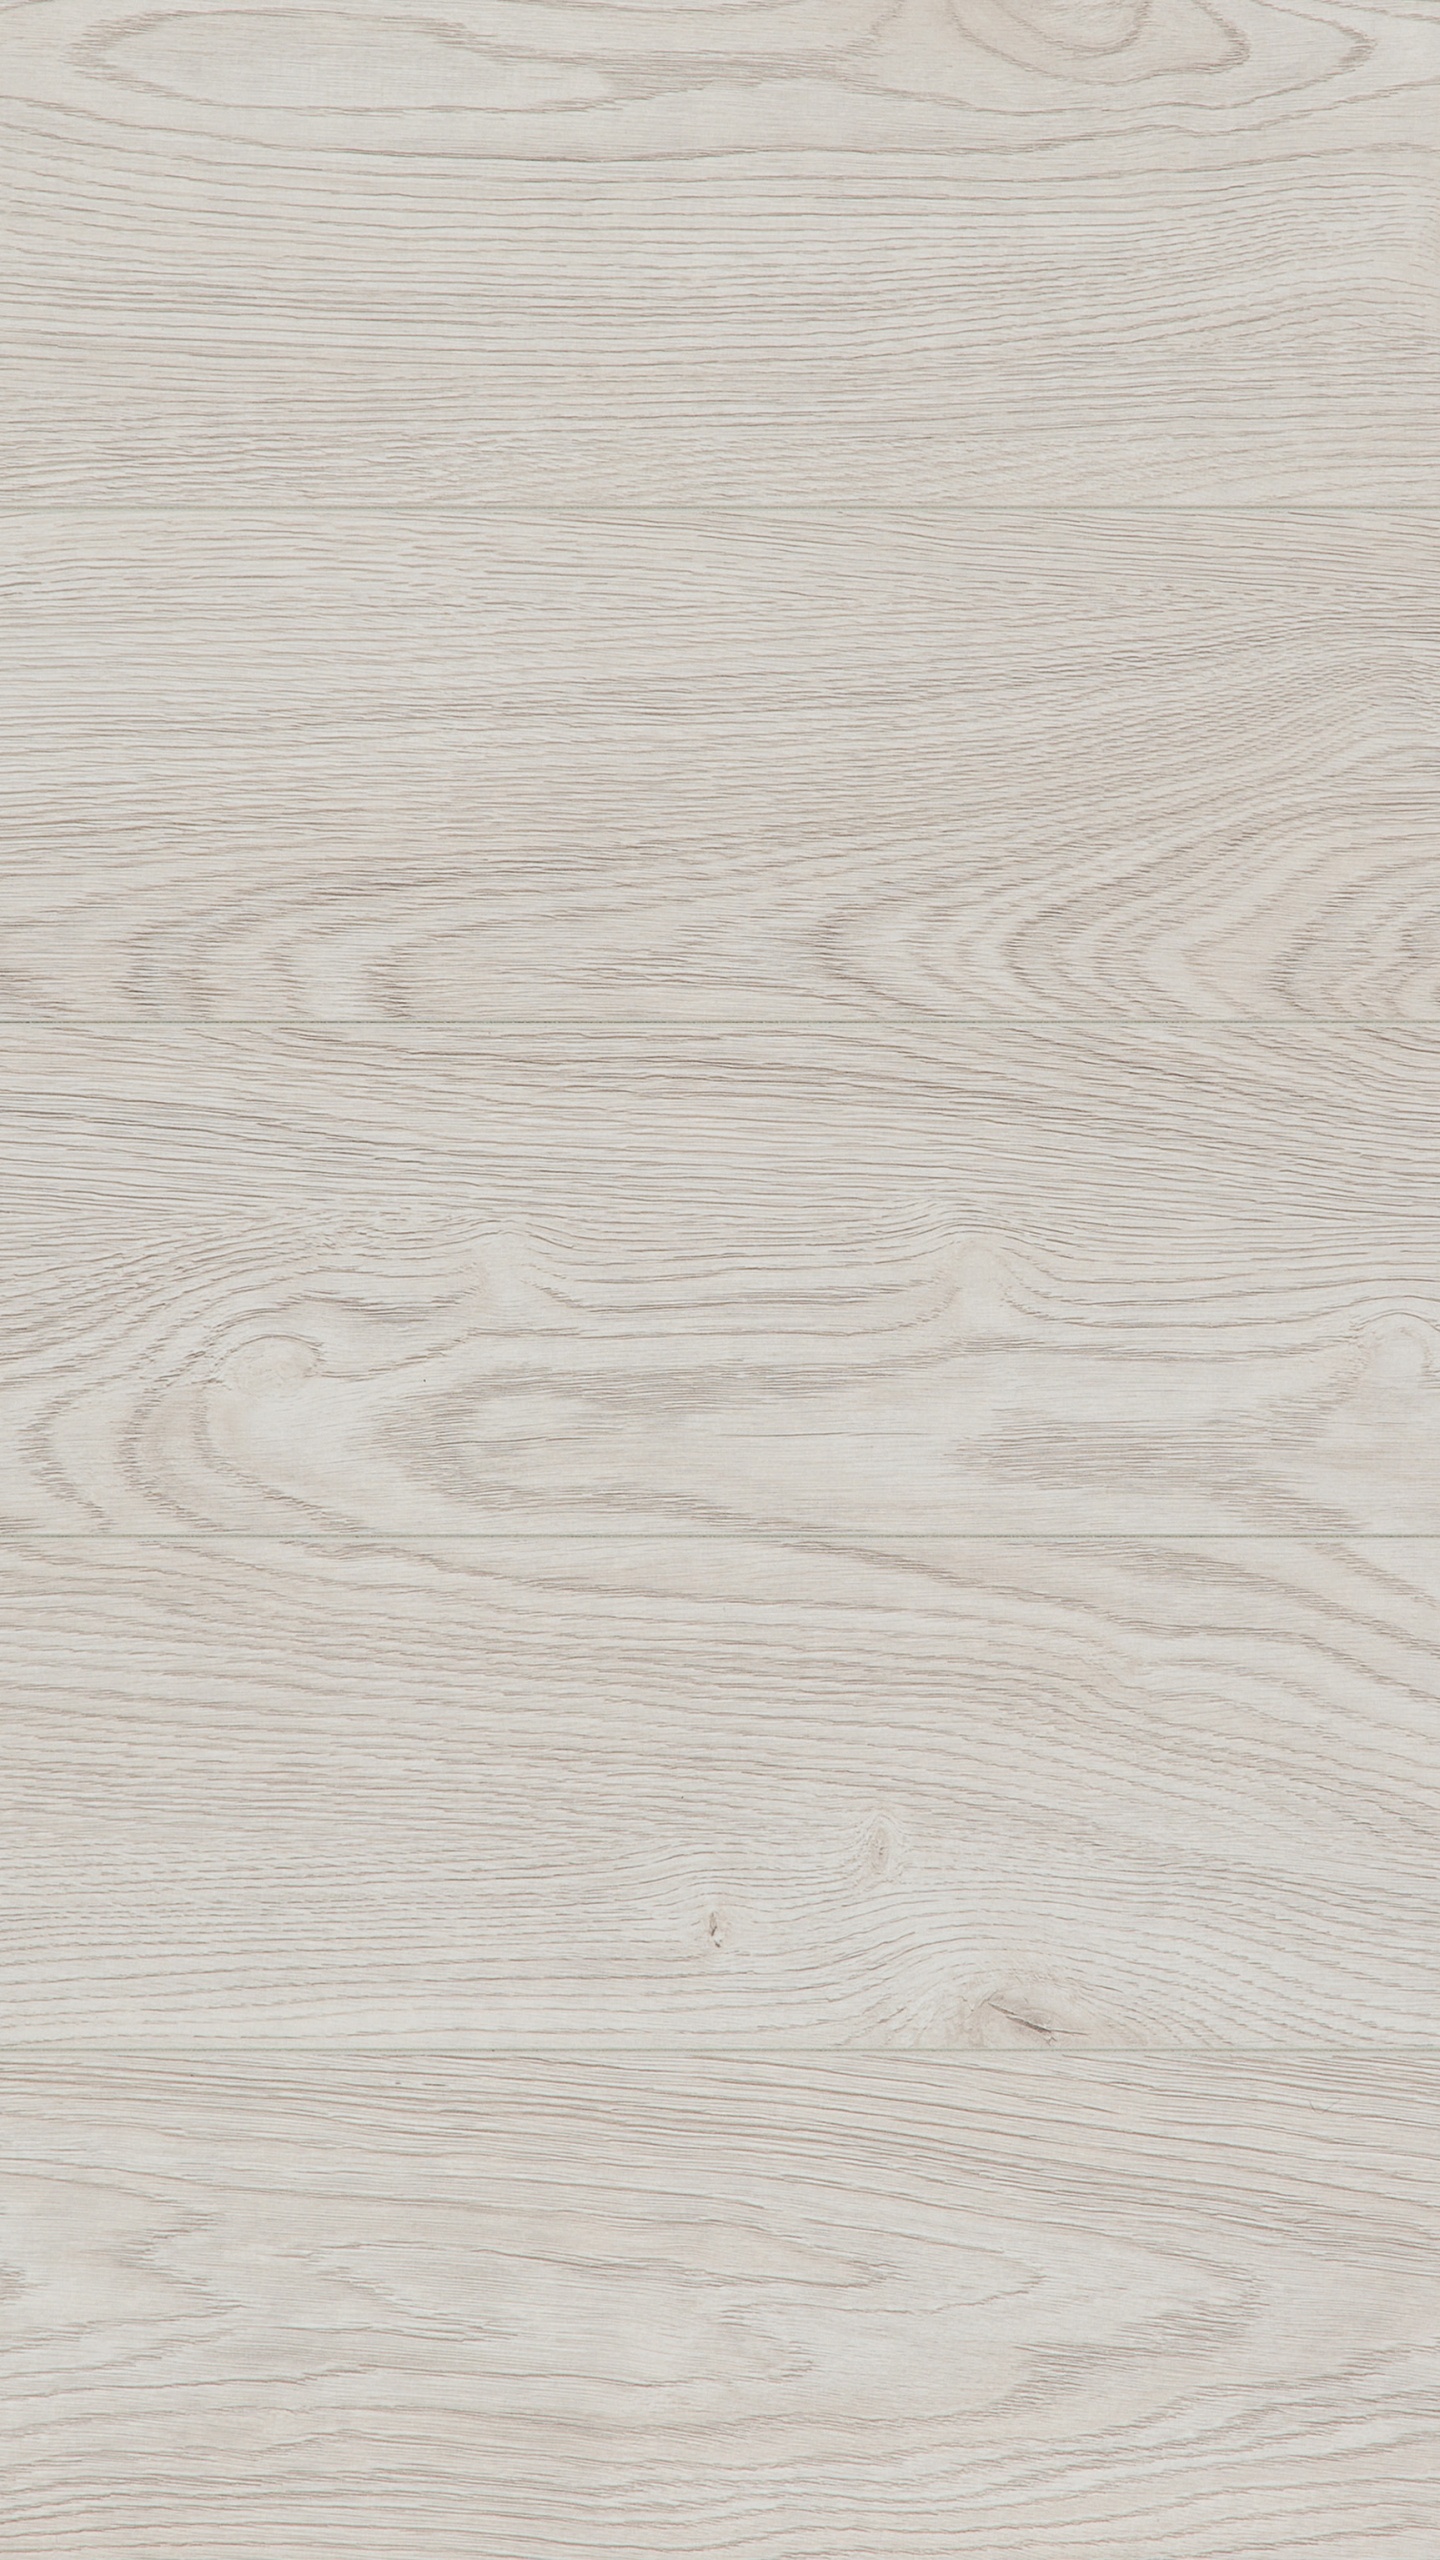 White and Brown Wooden Surface. Wallpaper in 1440x2560 Resolution